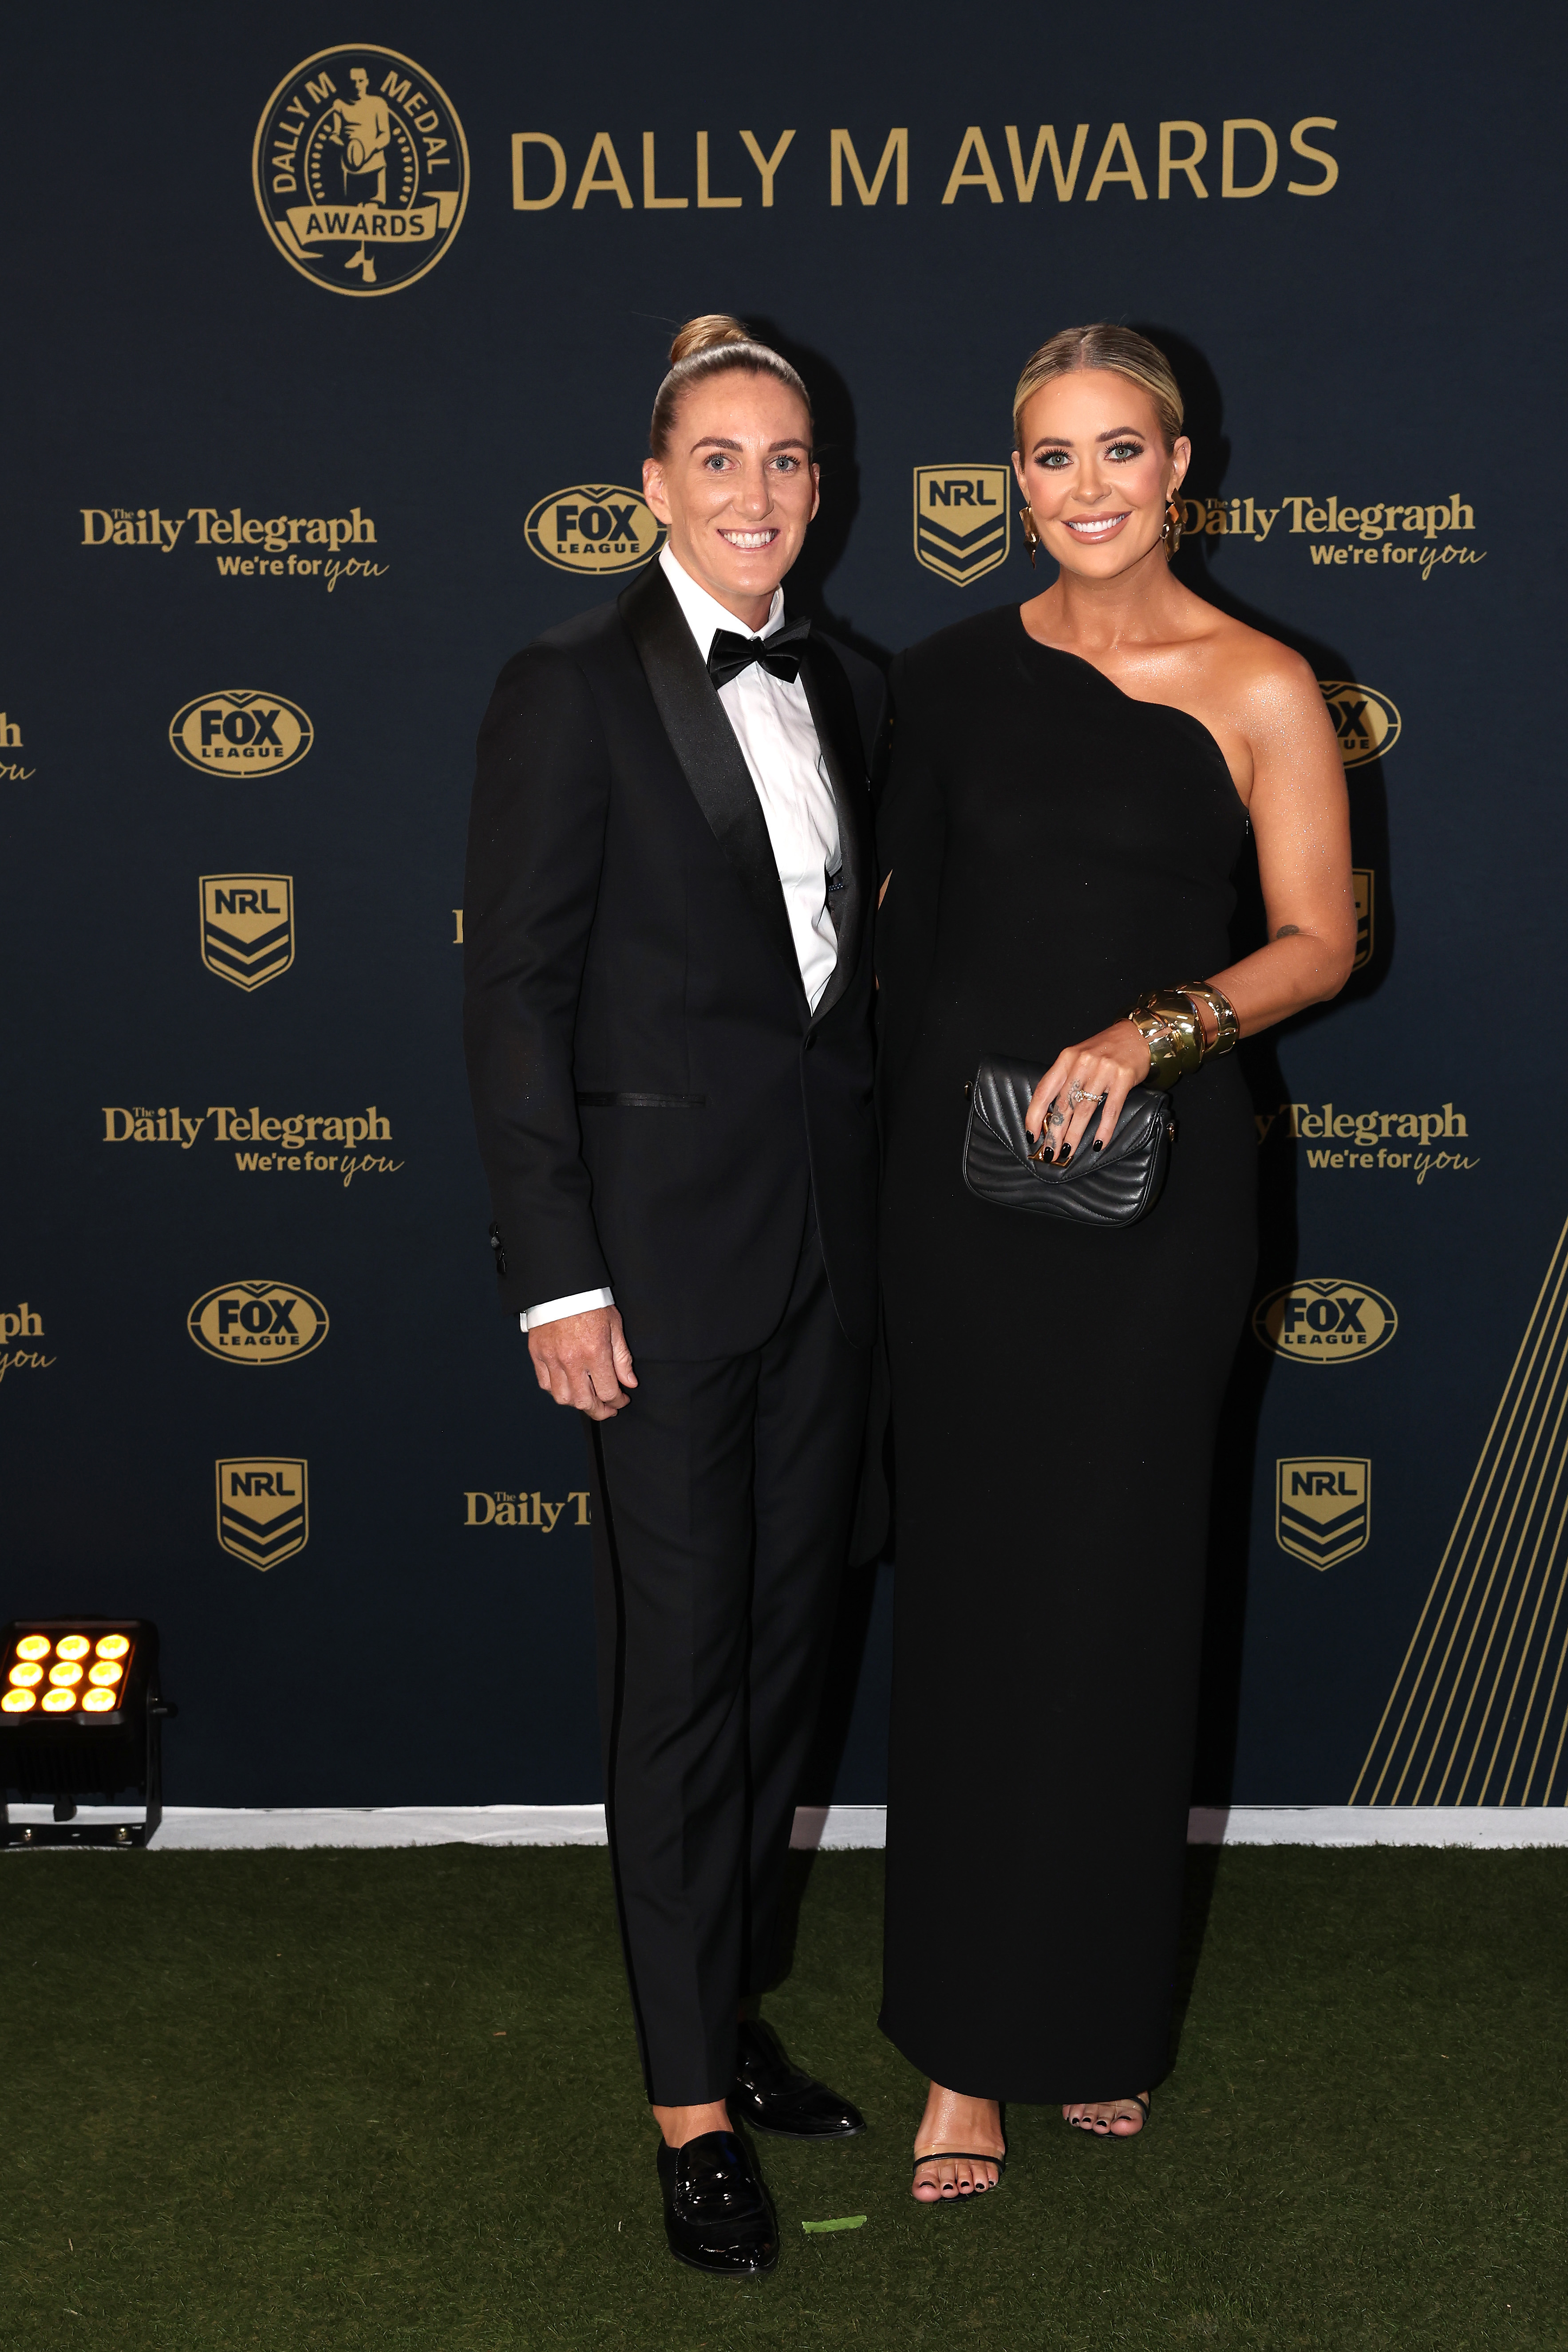 Dally M red carpet 2023 NRLs biggest names arrive in style at the Dally M Awards